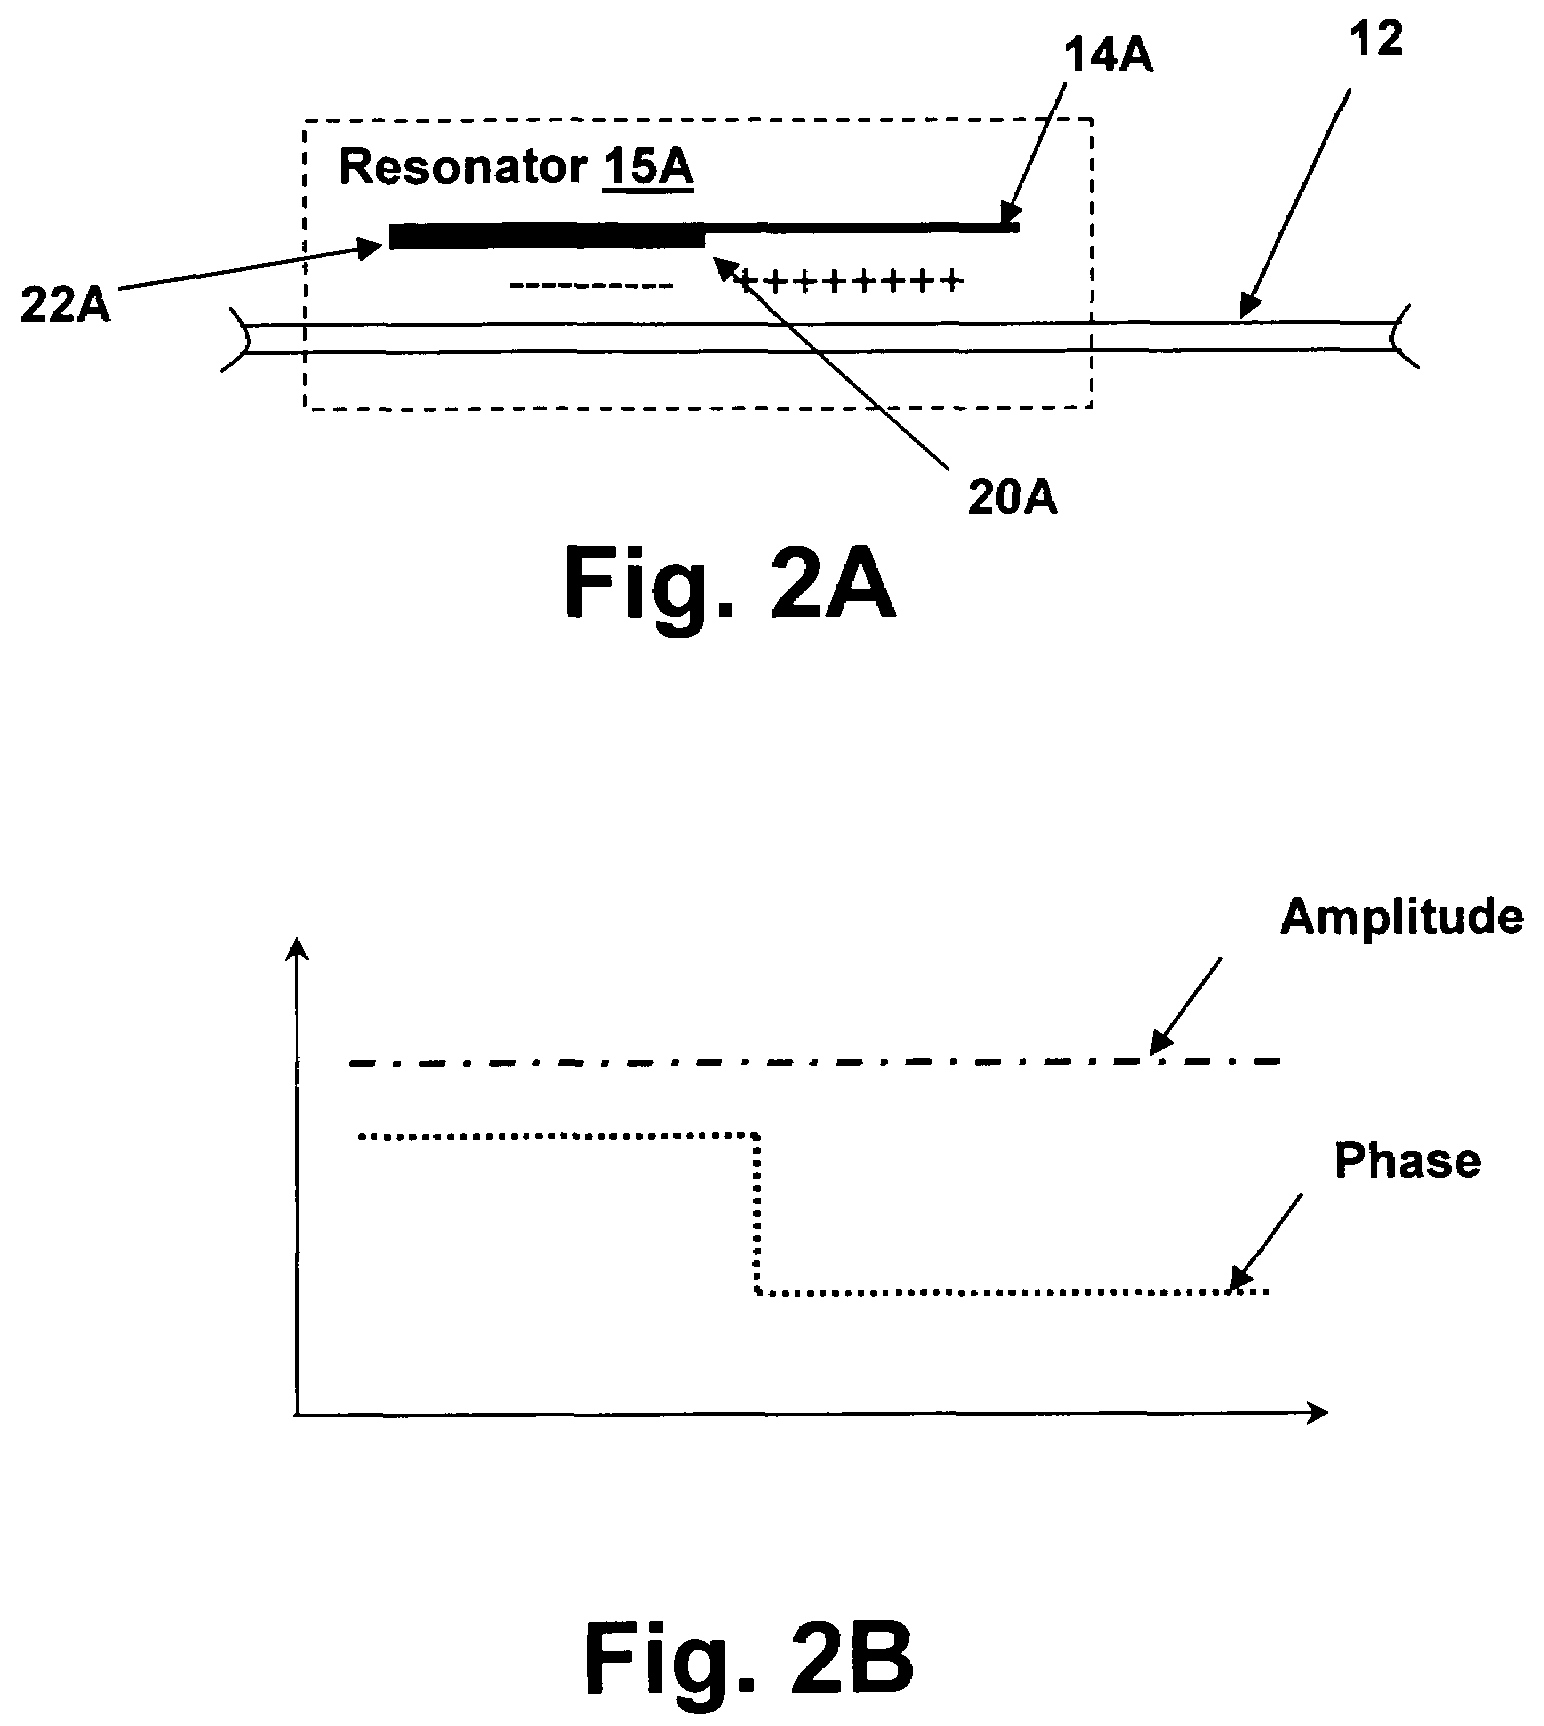 Method and system for optical measurement via a resonator having a non-uniform phase profile